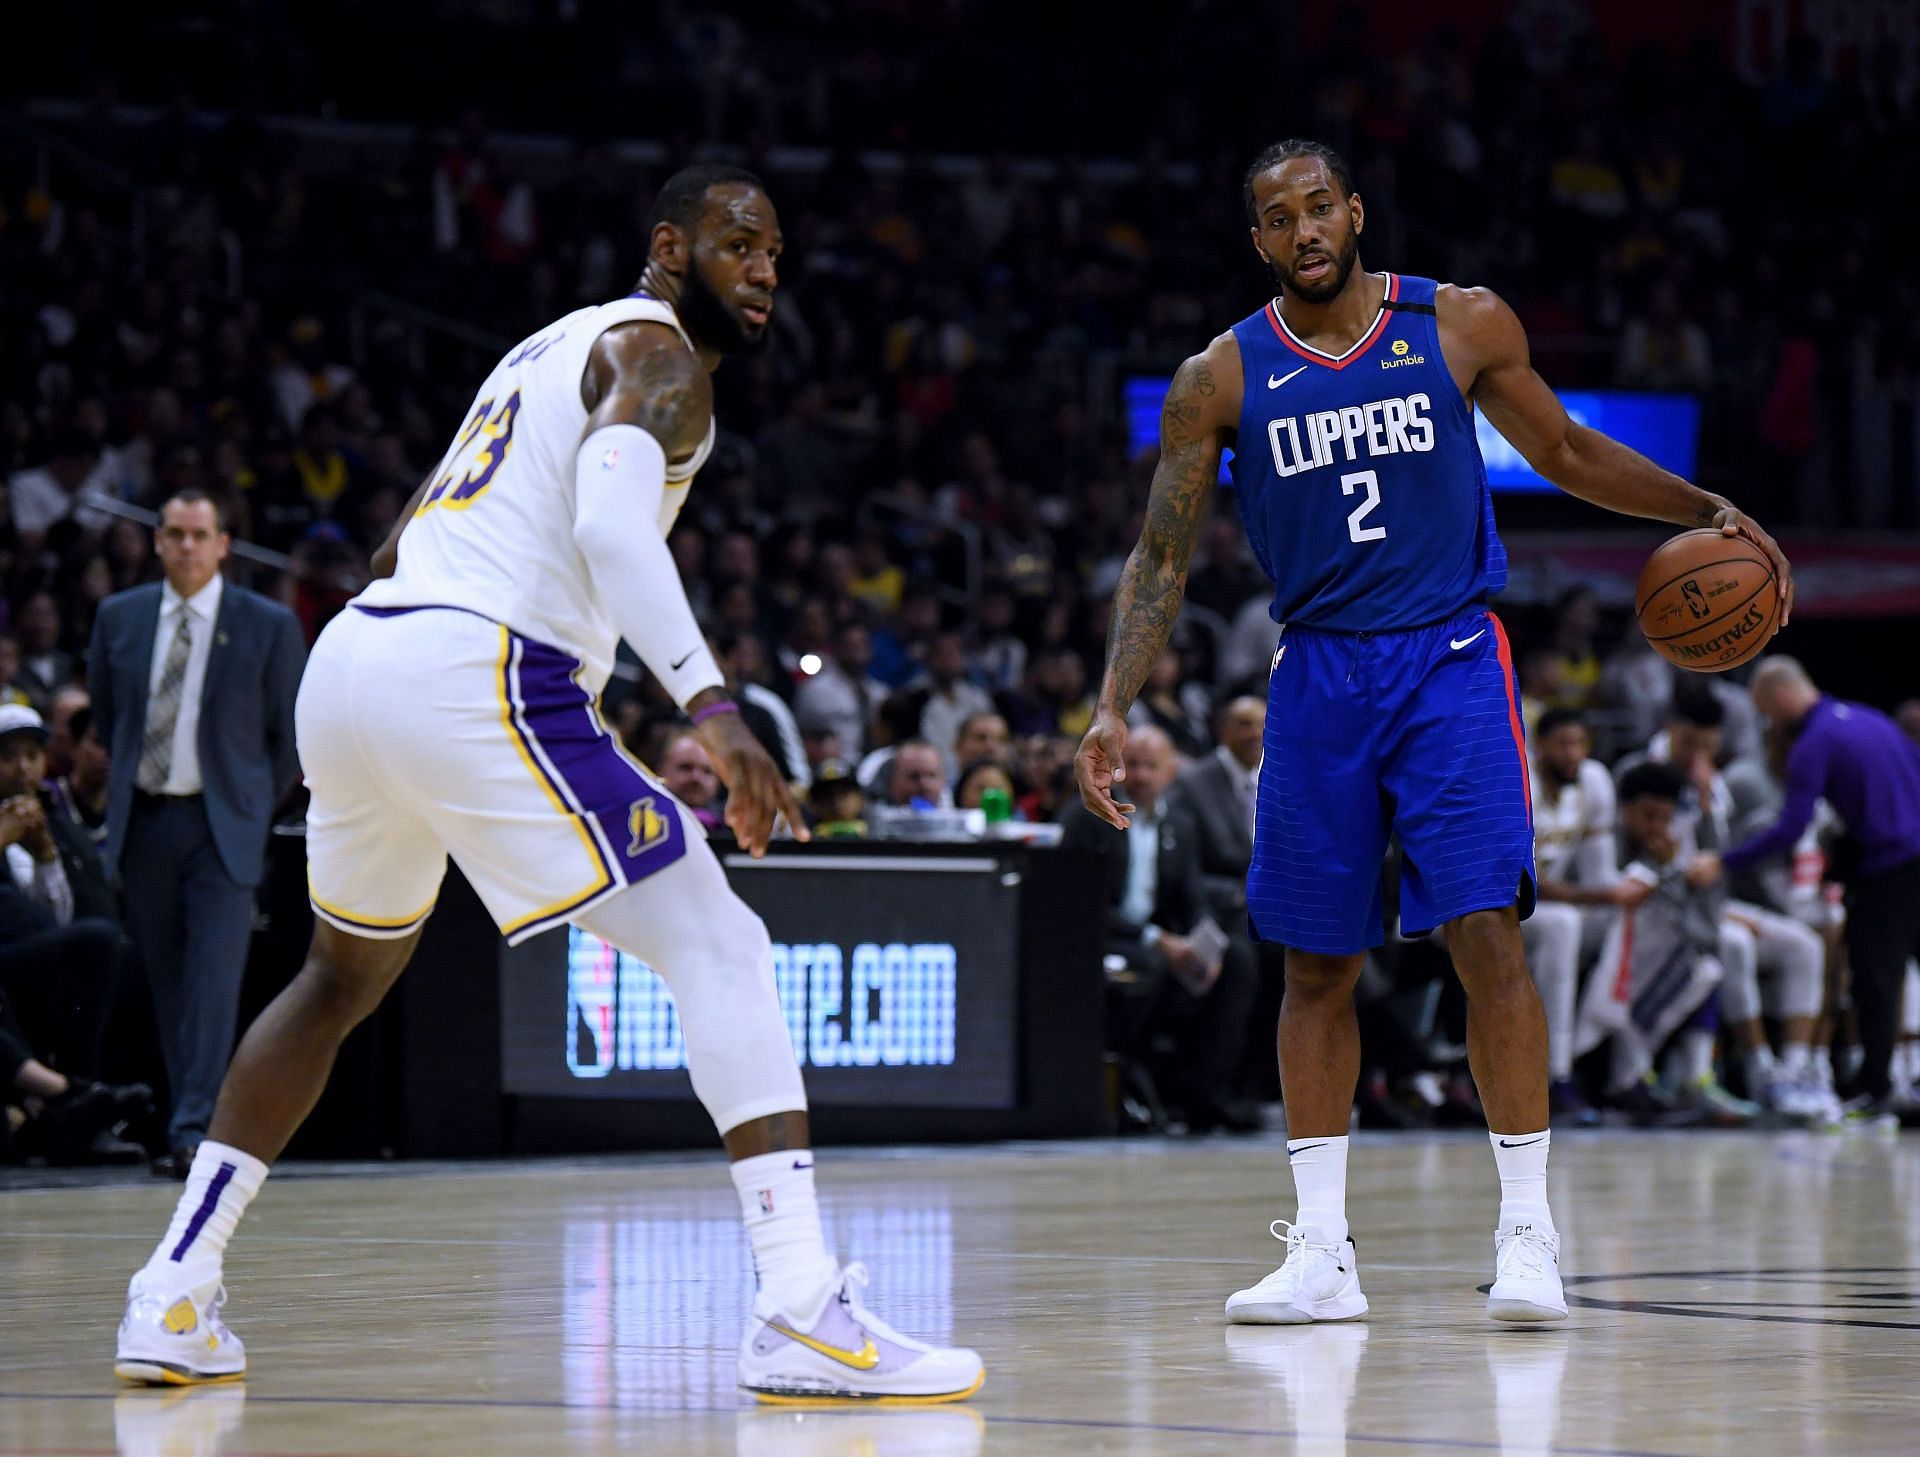 LeBron James and Kawhi Leonard in action during LA Lakers v Los Angeles Clippers game